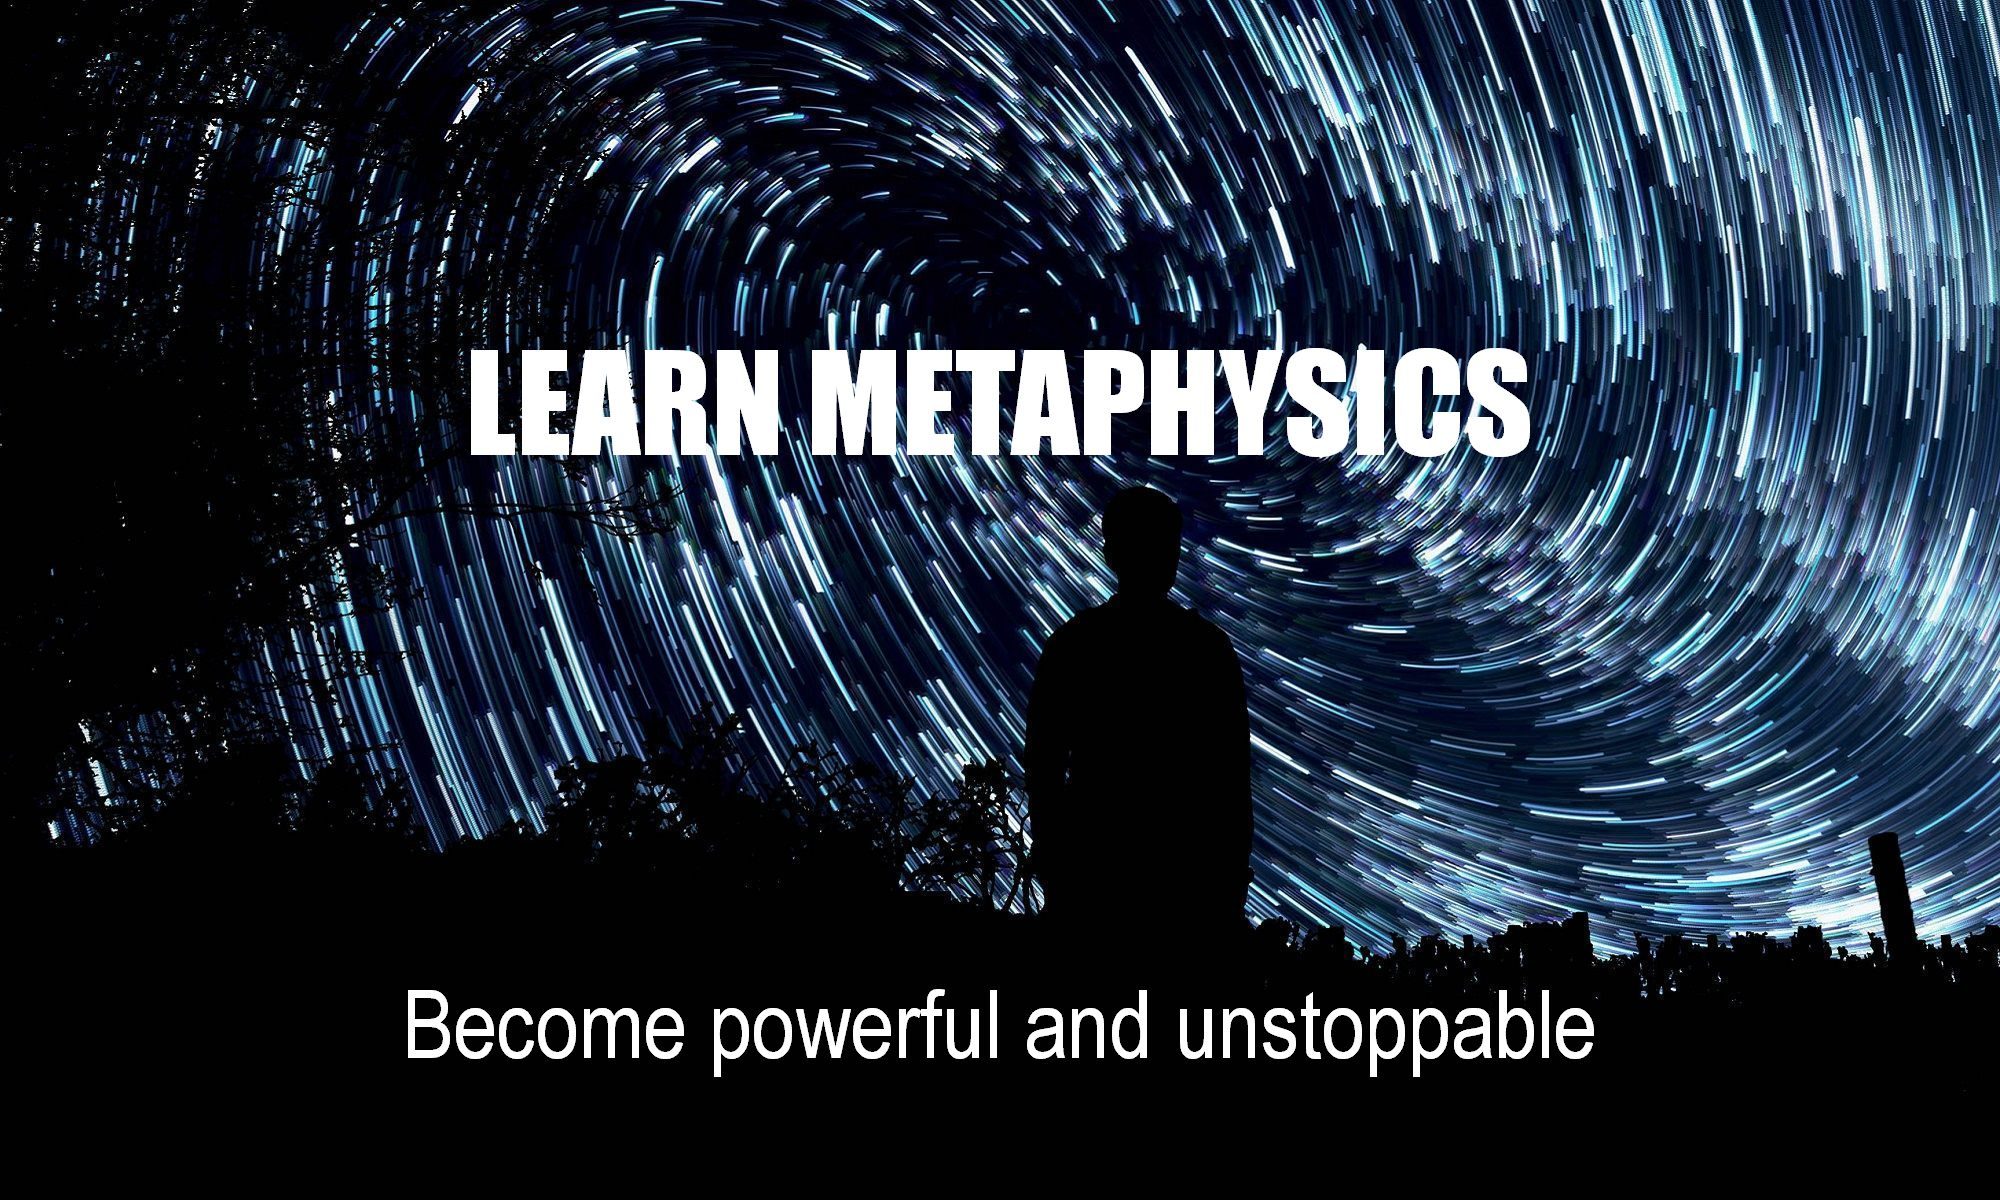 How Do I Become Powerful & Unstoppable? Learn Metaphysics Conscious Creation